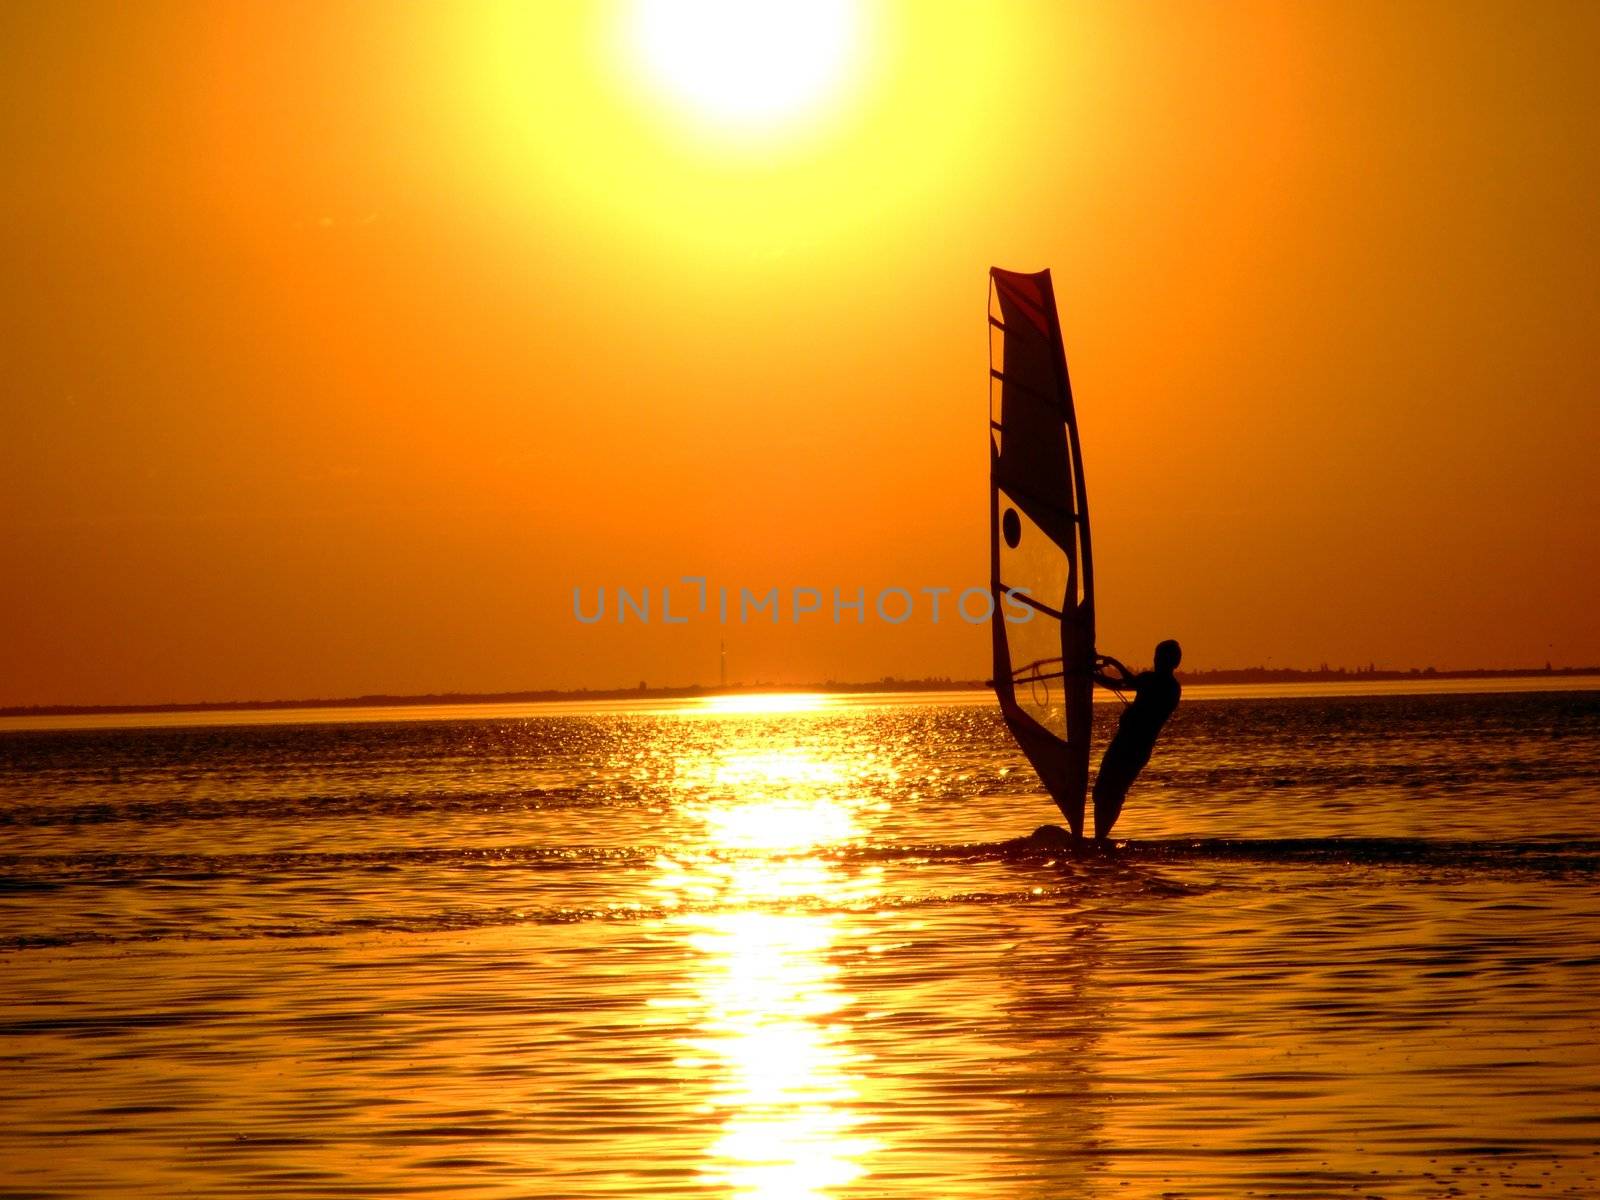 Silhouette of a windsurfer on waves of a gulf on a sunset by acidgrey